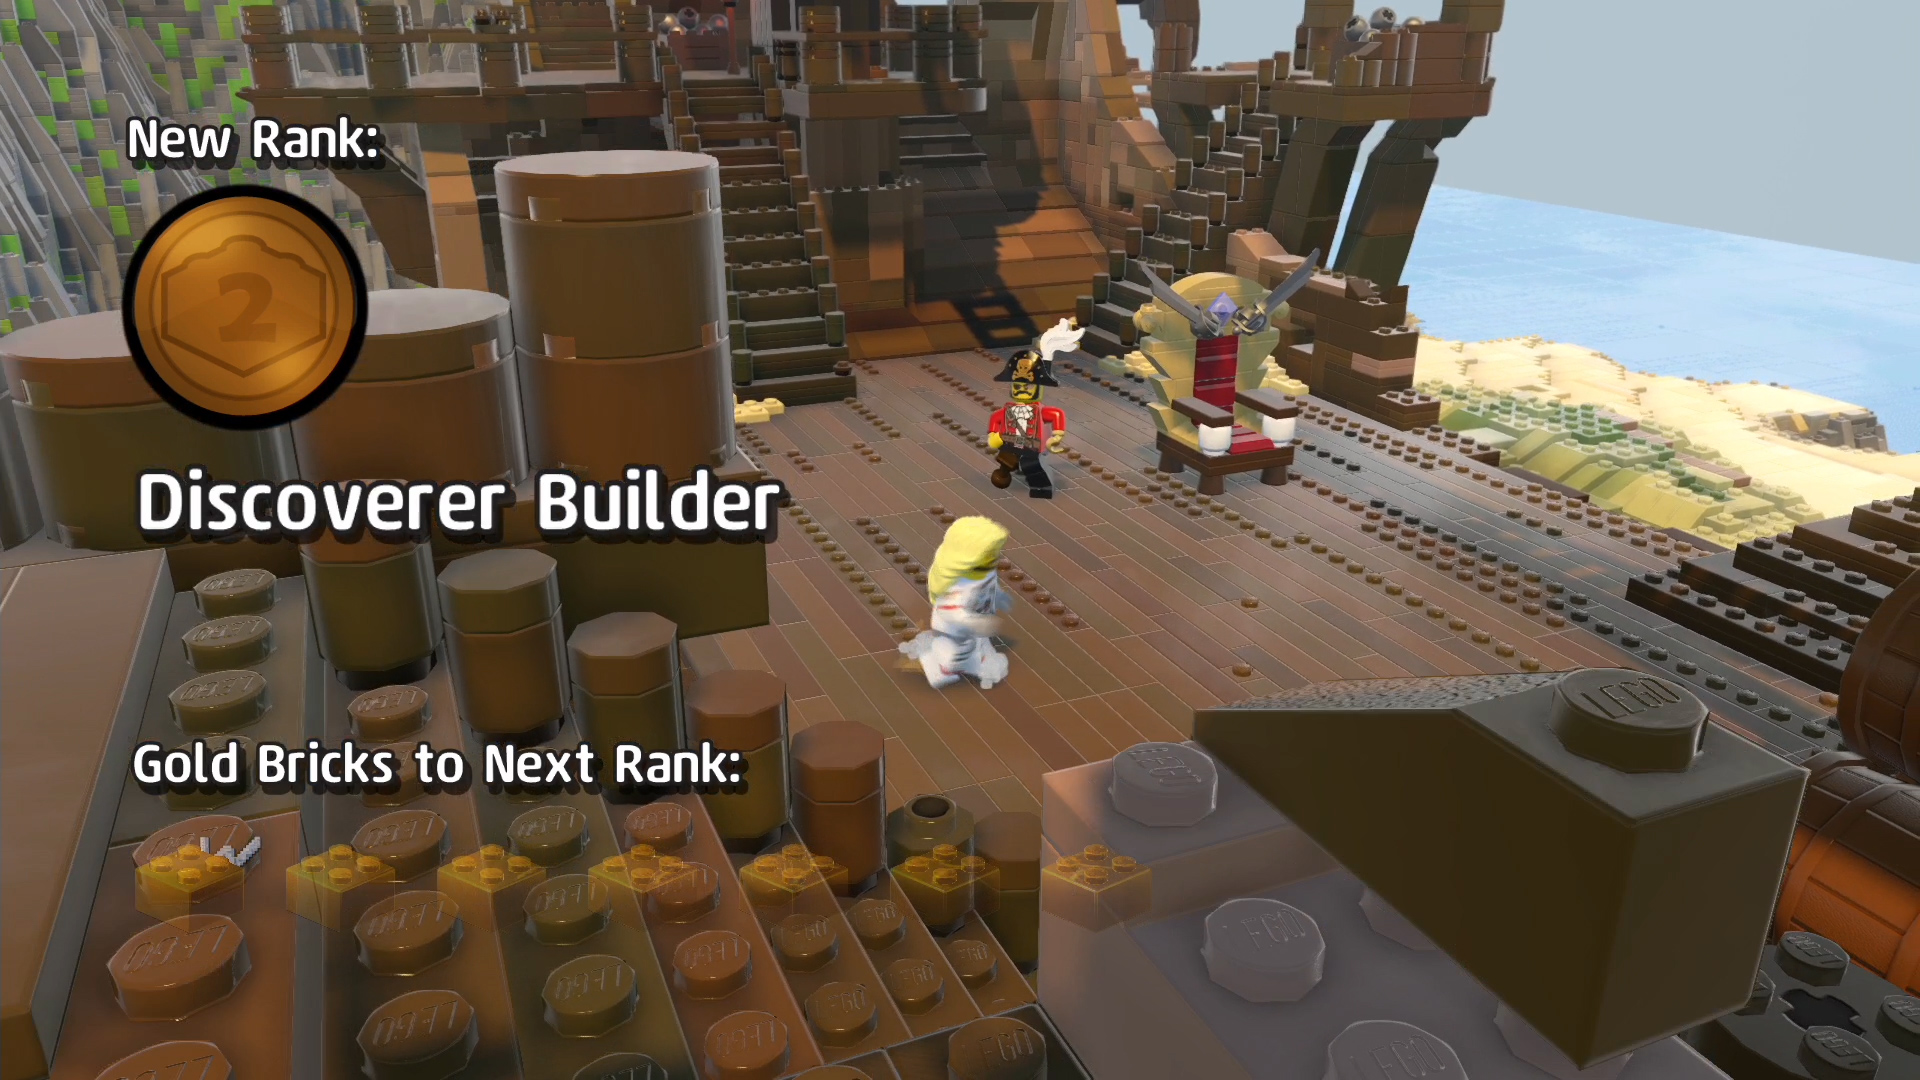 Getting Started In LEGO Worlds